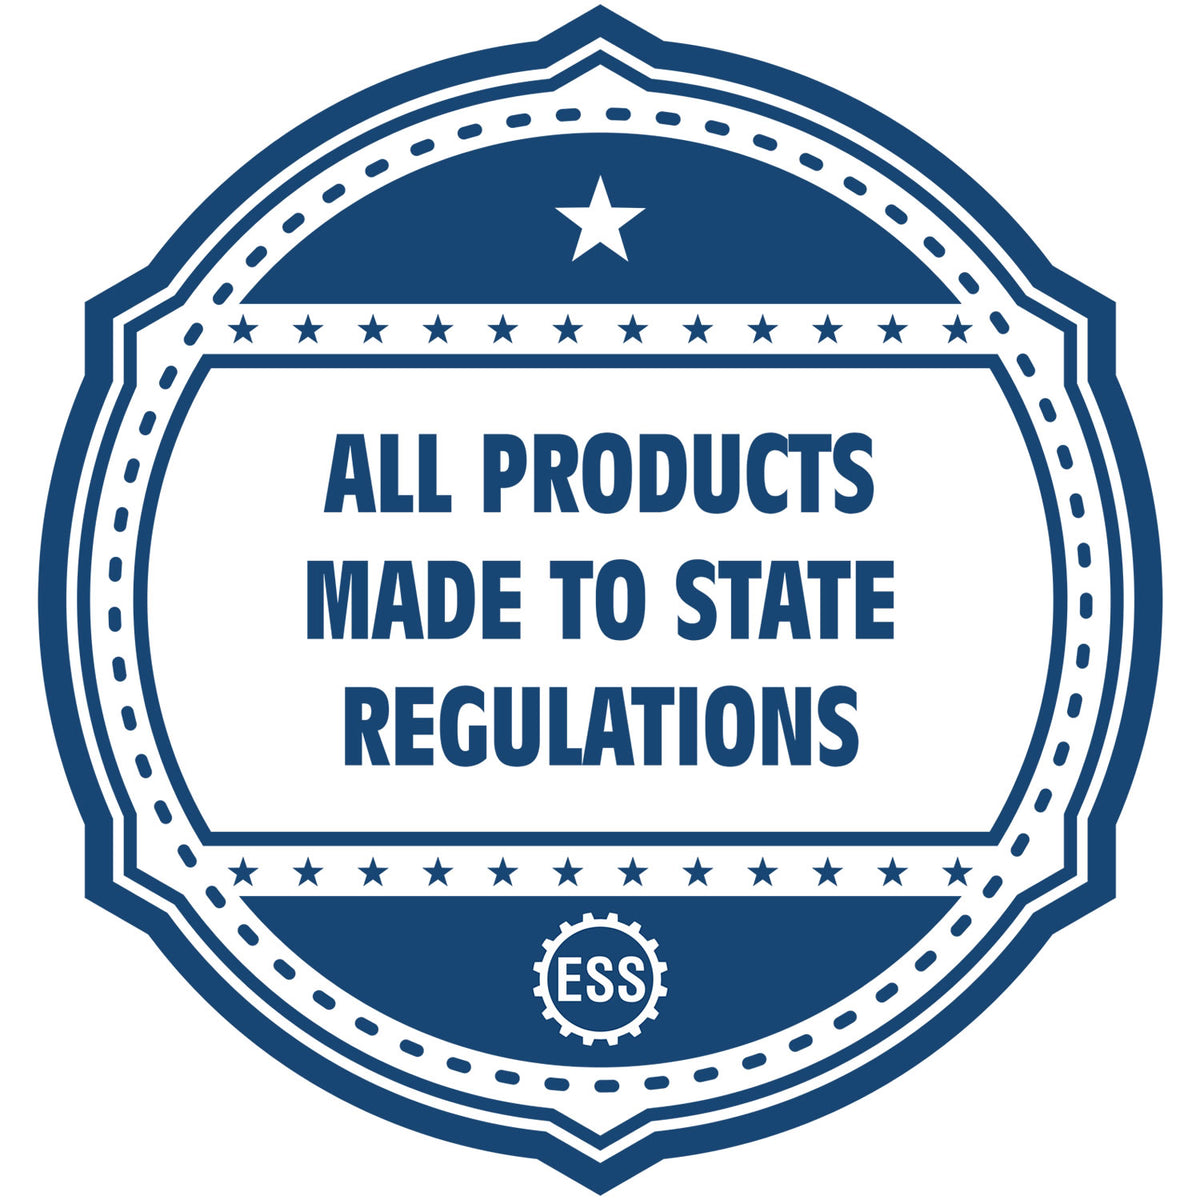 A blue icon or badge for the Hybrid South Dakota Landscape Architect Seal showing that this product is made in compliance with state regulations.